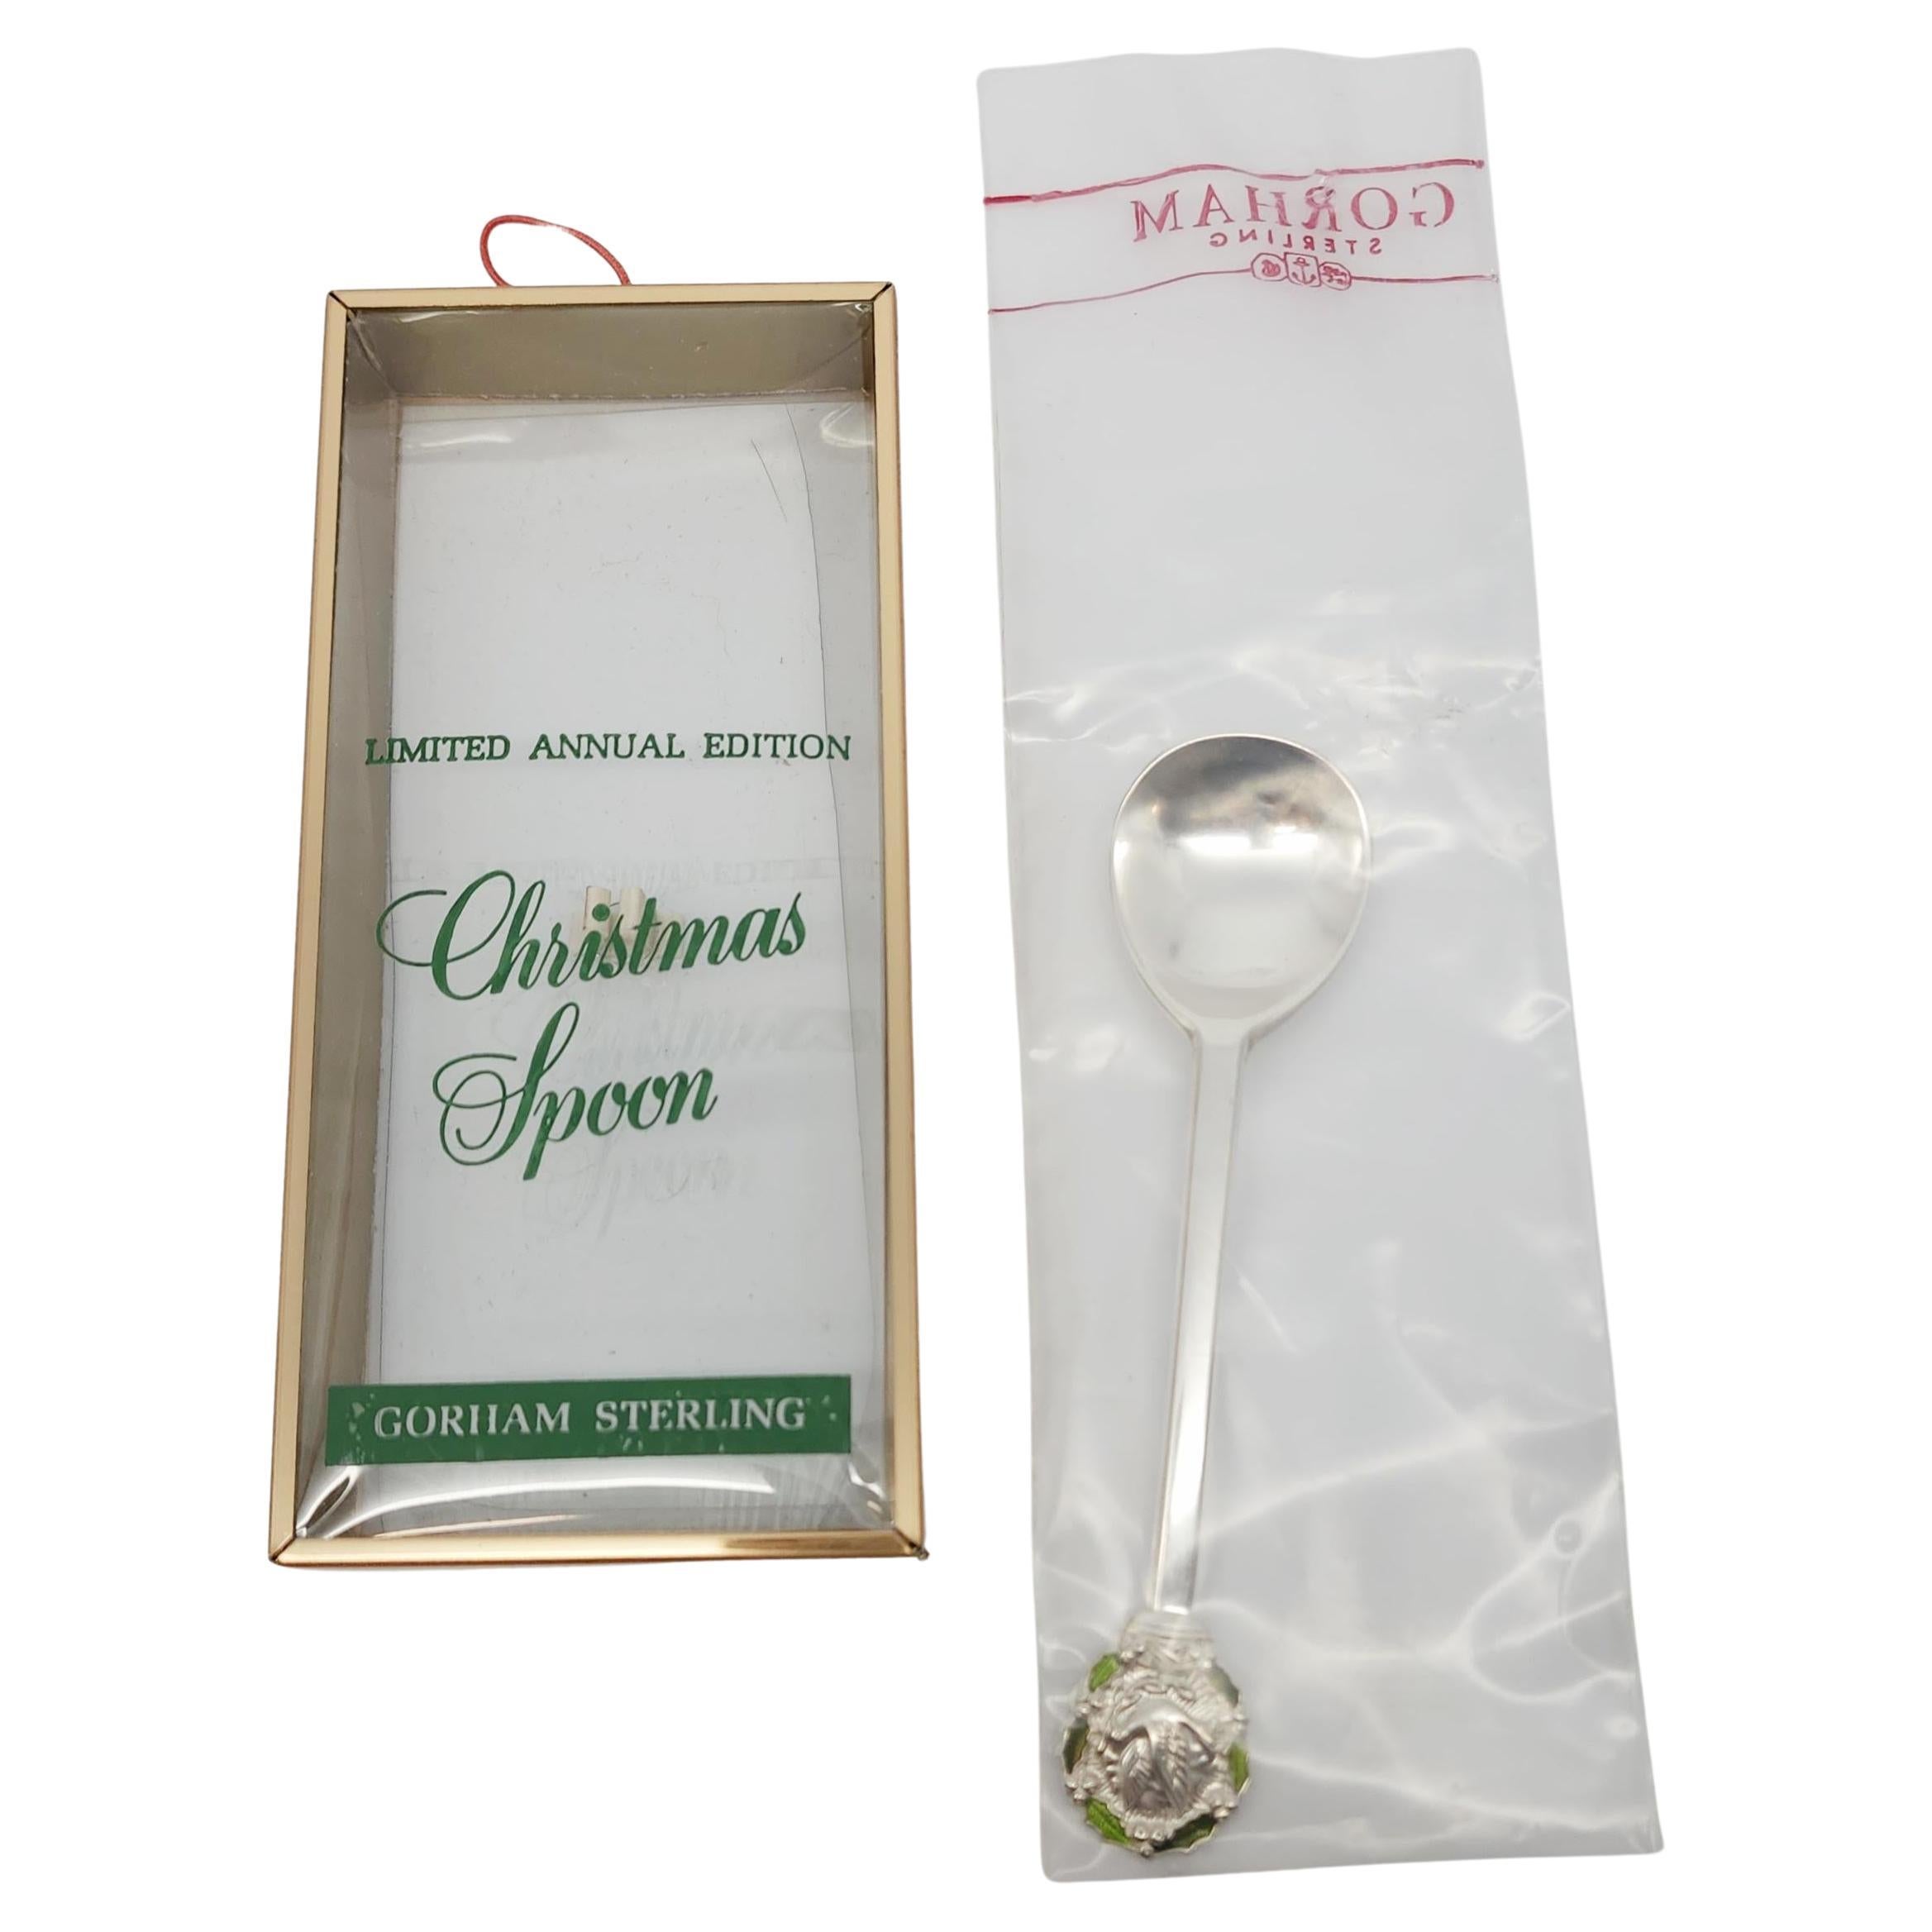 Gorham Sterling Silver 1977 Christmas Spoon Sealed with Box #15798 For Sale